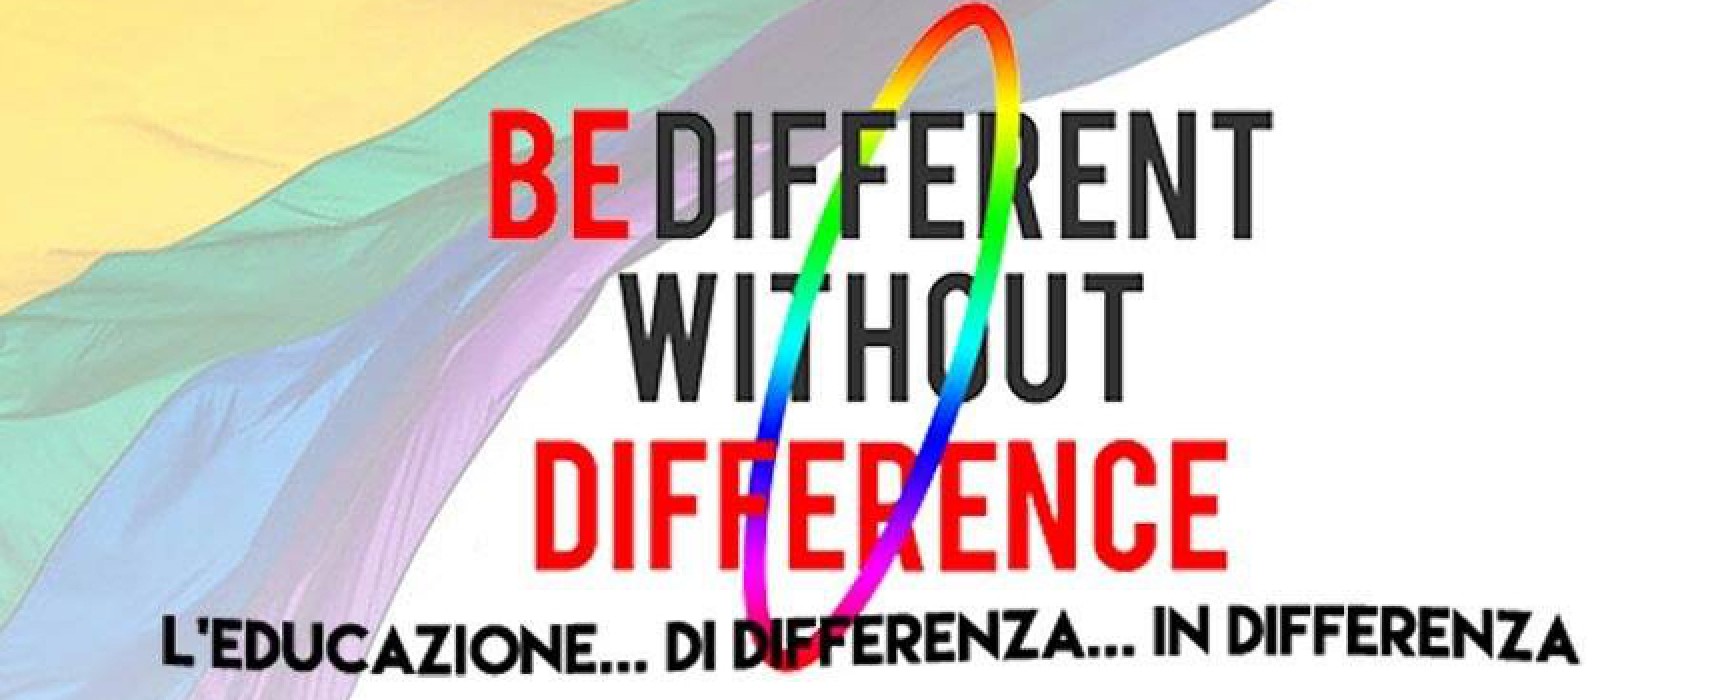 Arcigay Bat presenta “Be different without difference”, il sottile limite tra differenza e indifferenza